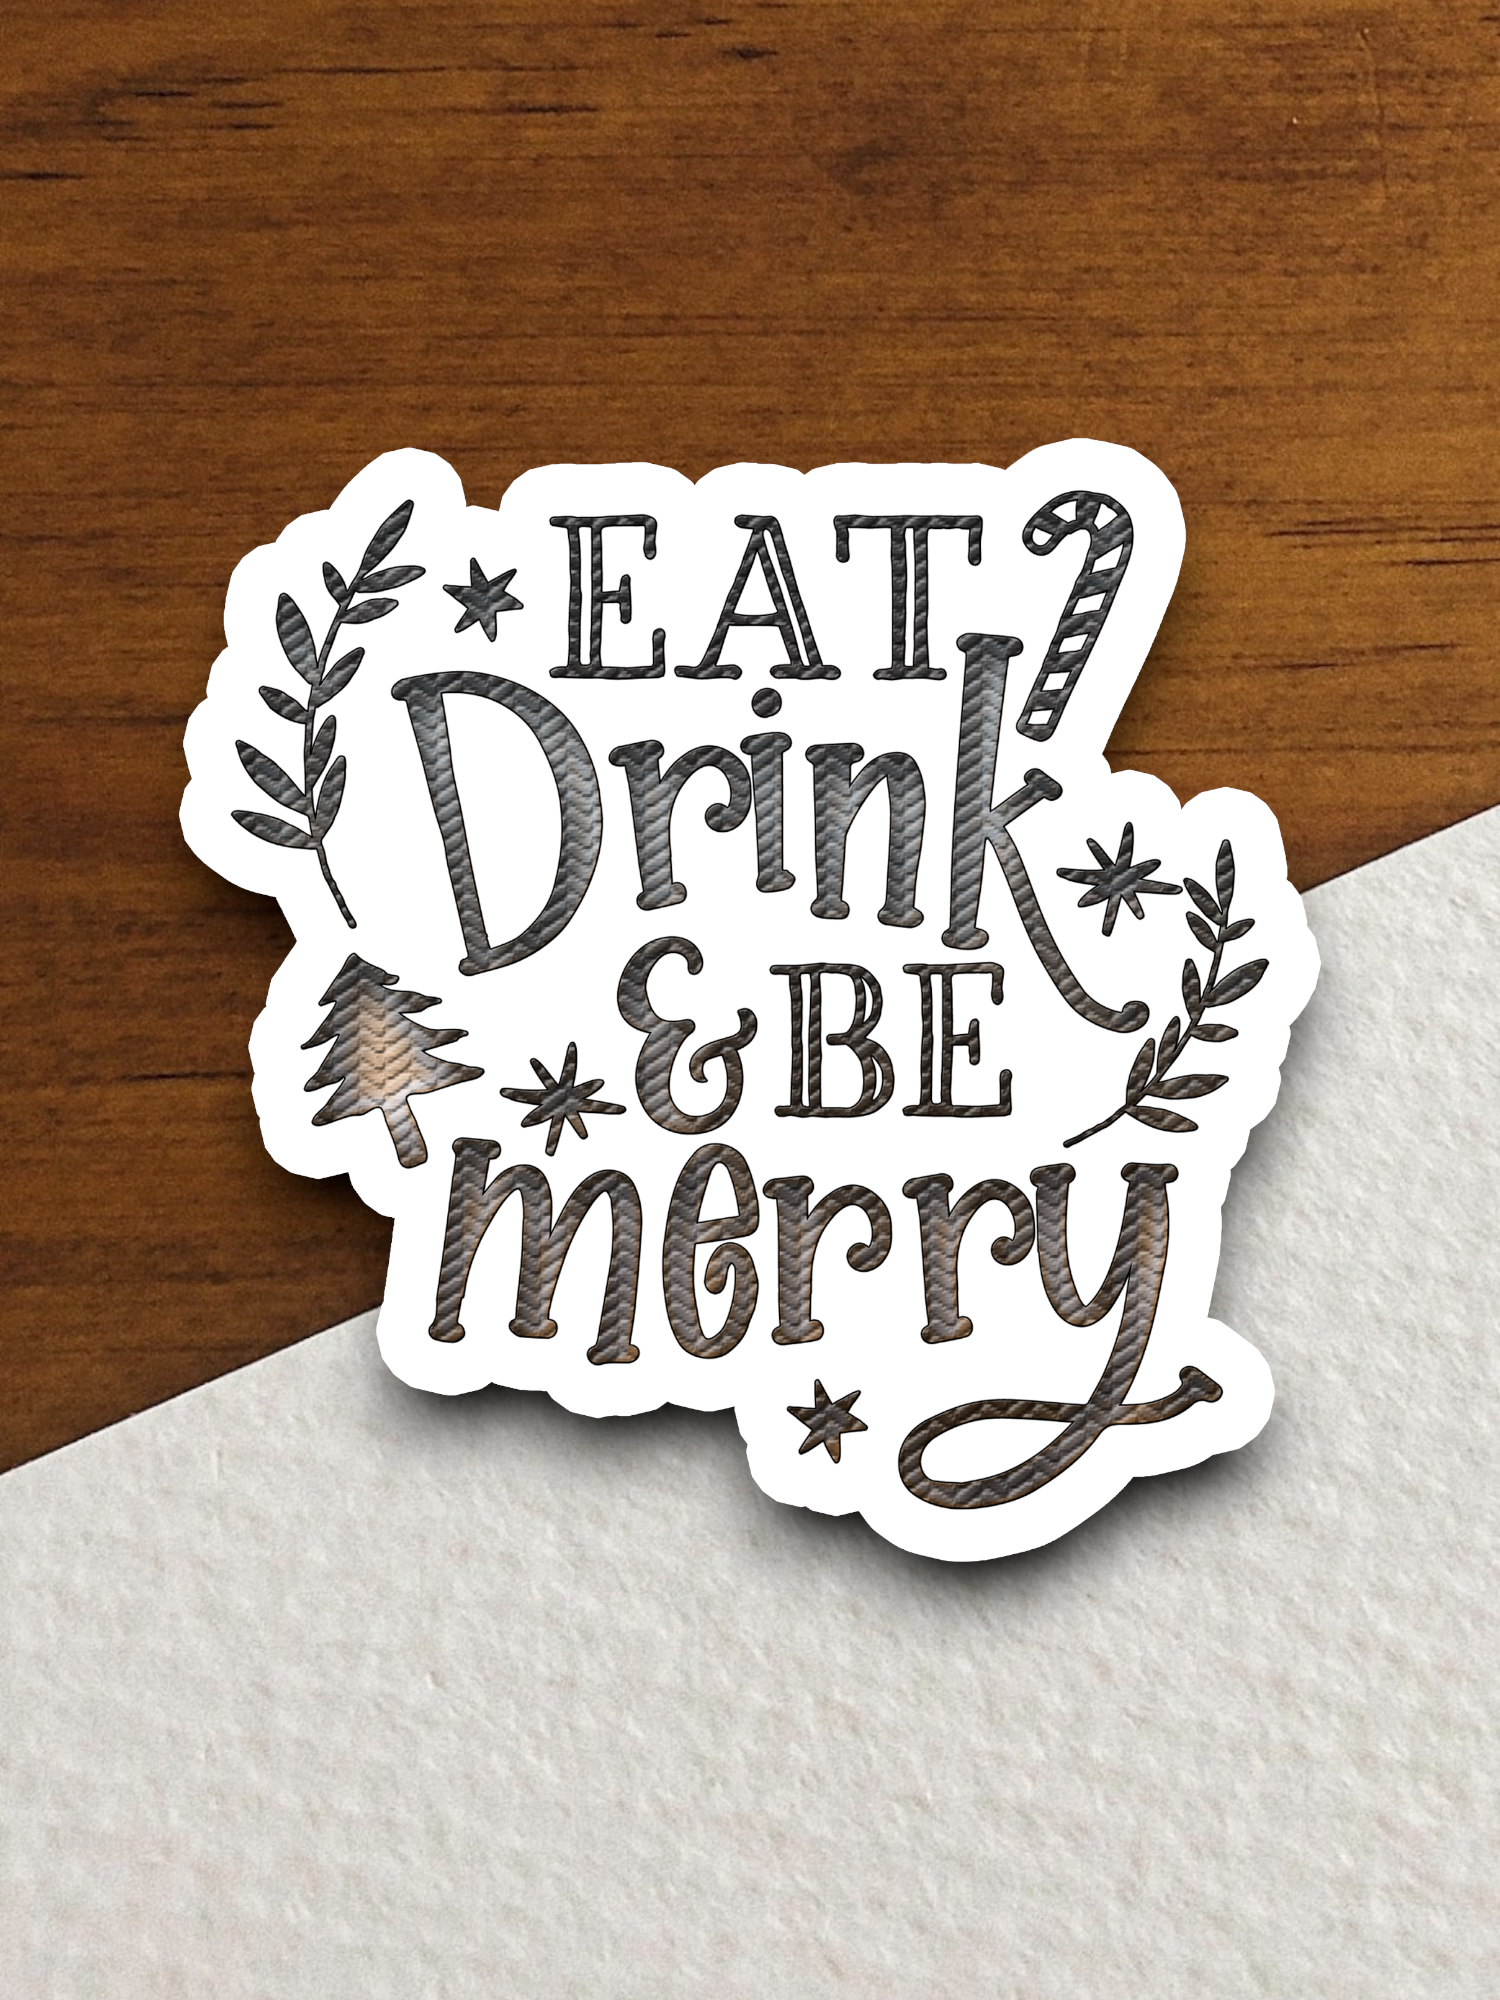 Eat Drink And Be Merry - Version 02 Holiday Sticker